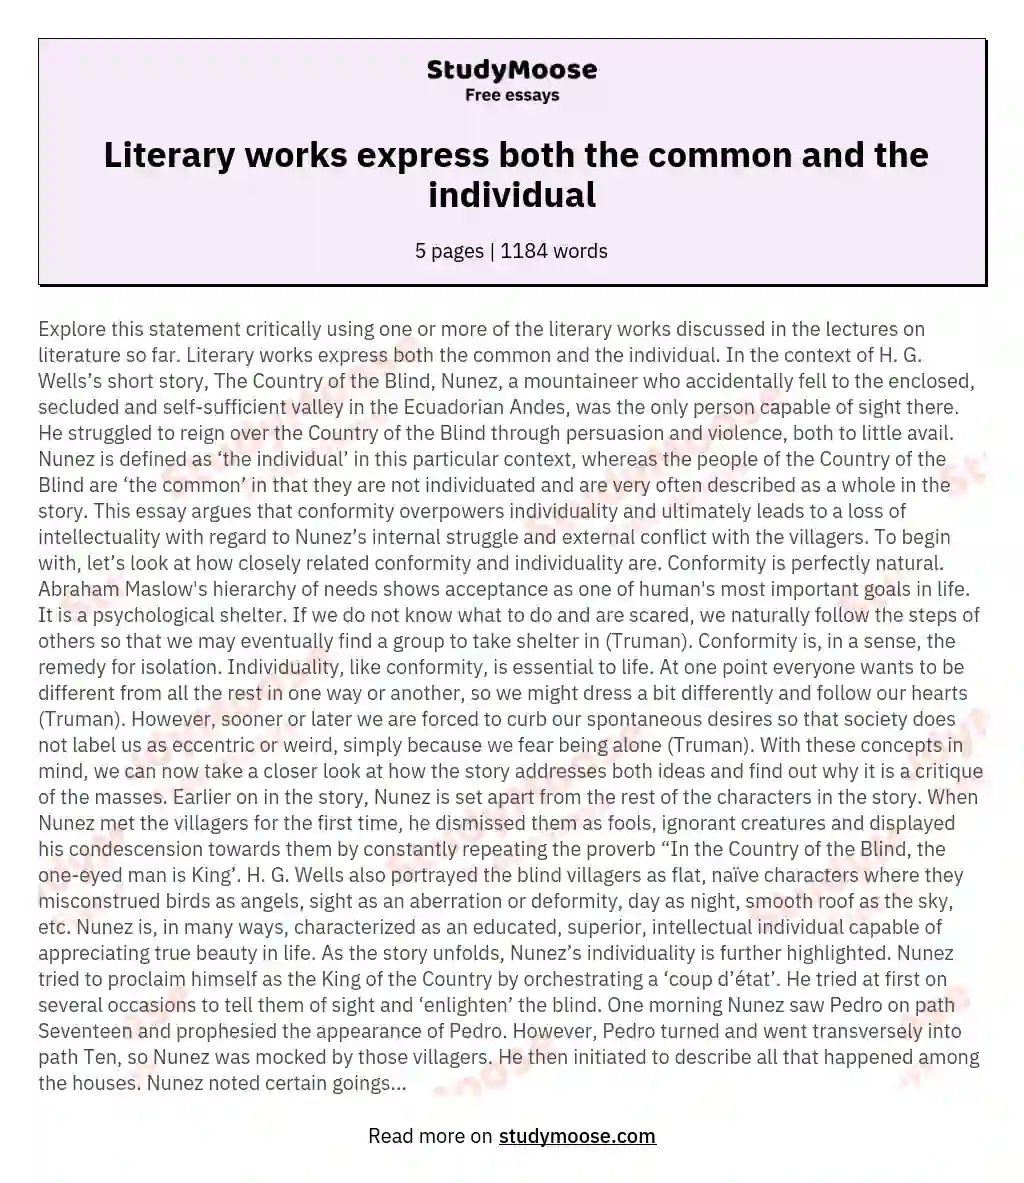  Literary works express both the common and the individual essay